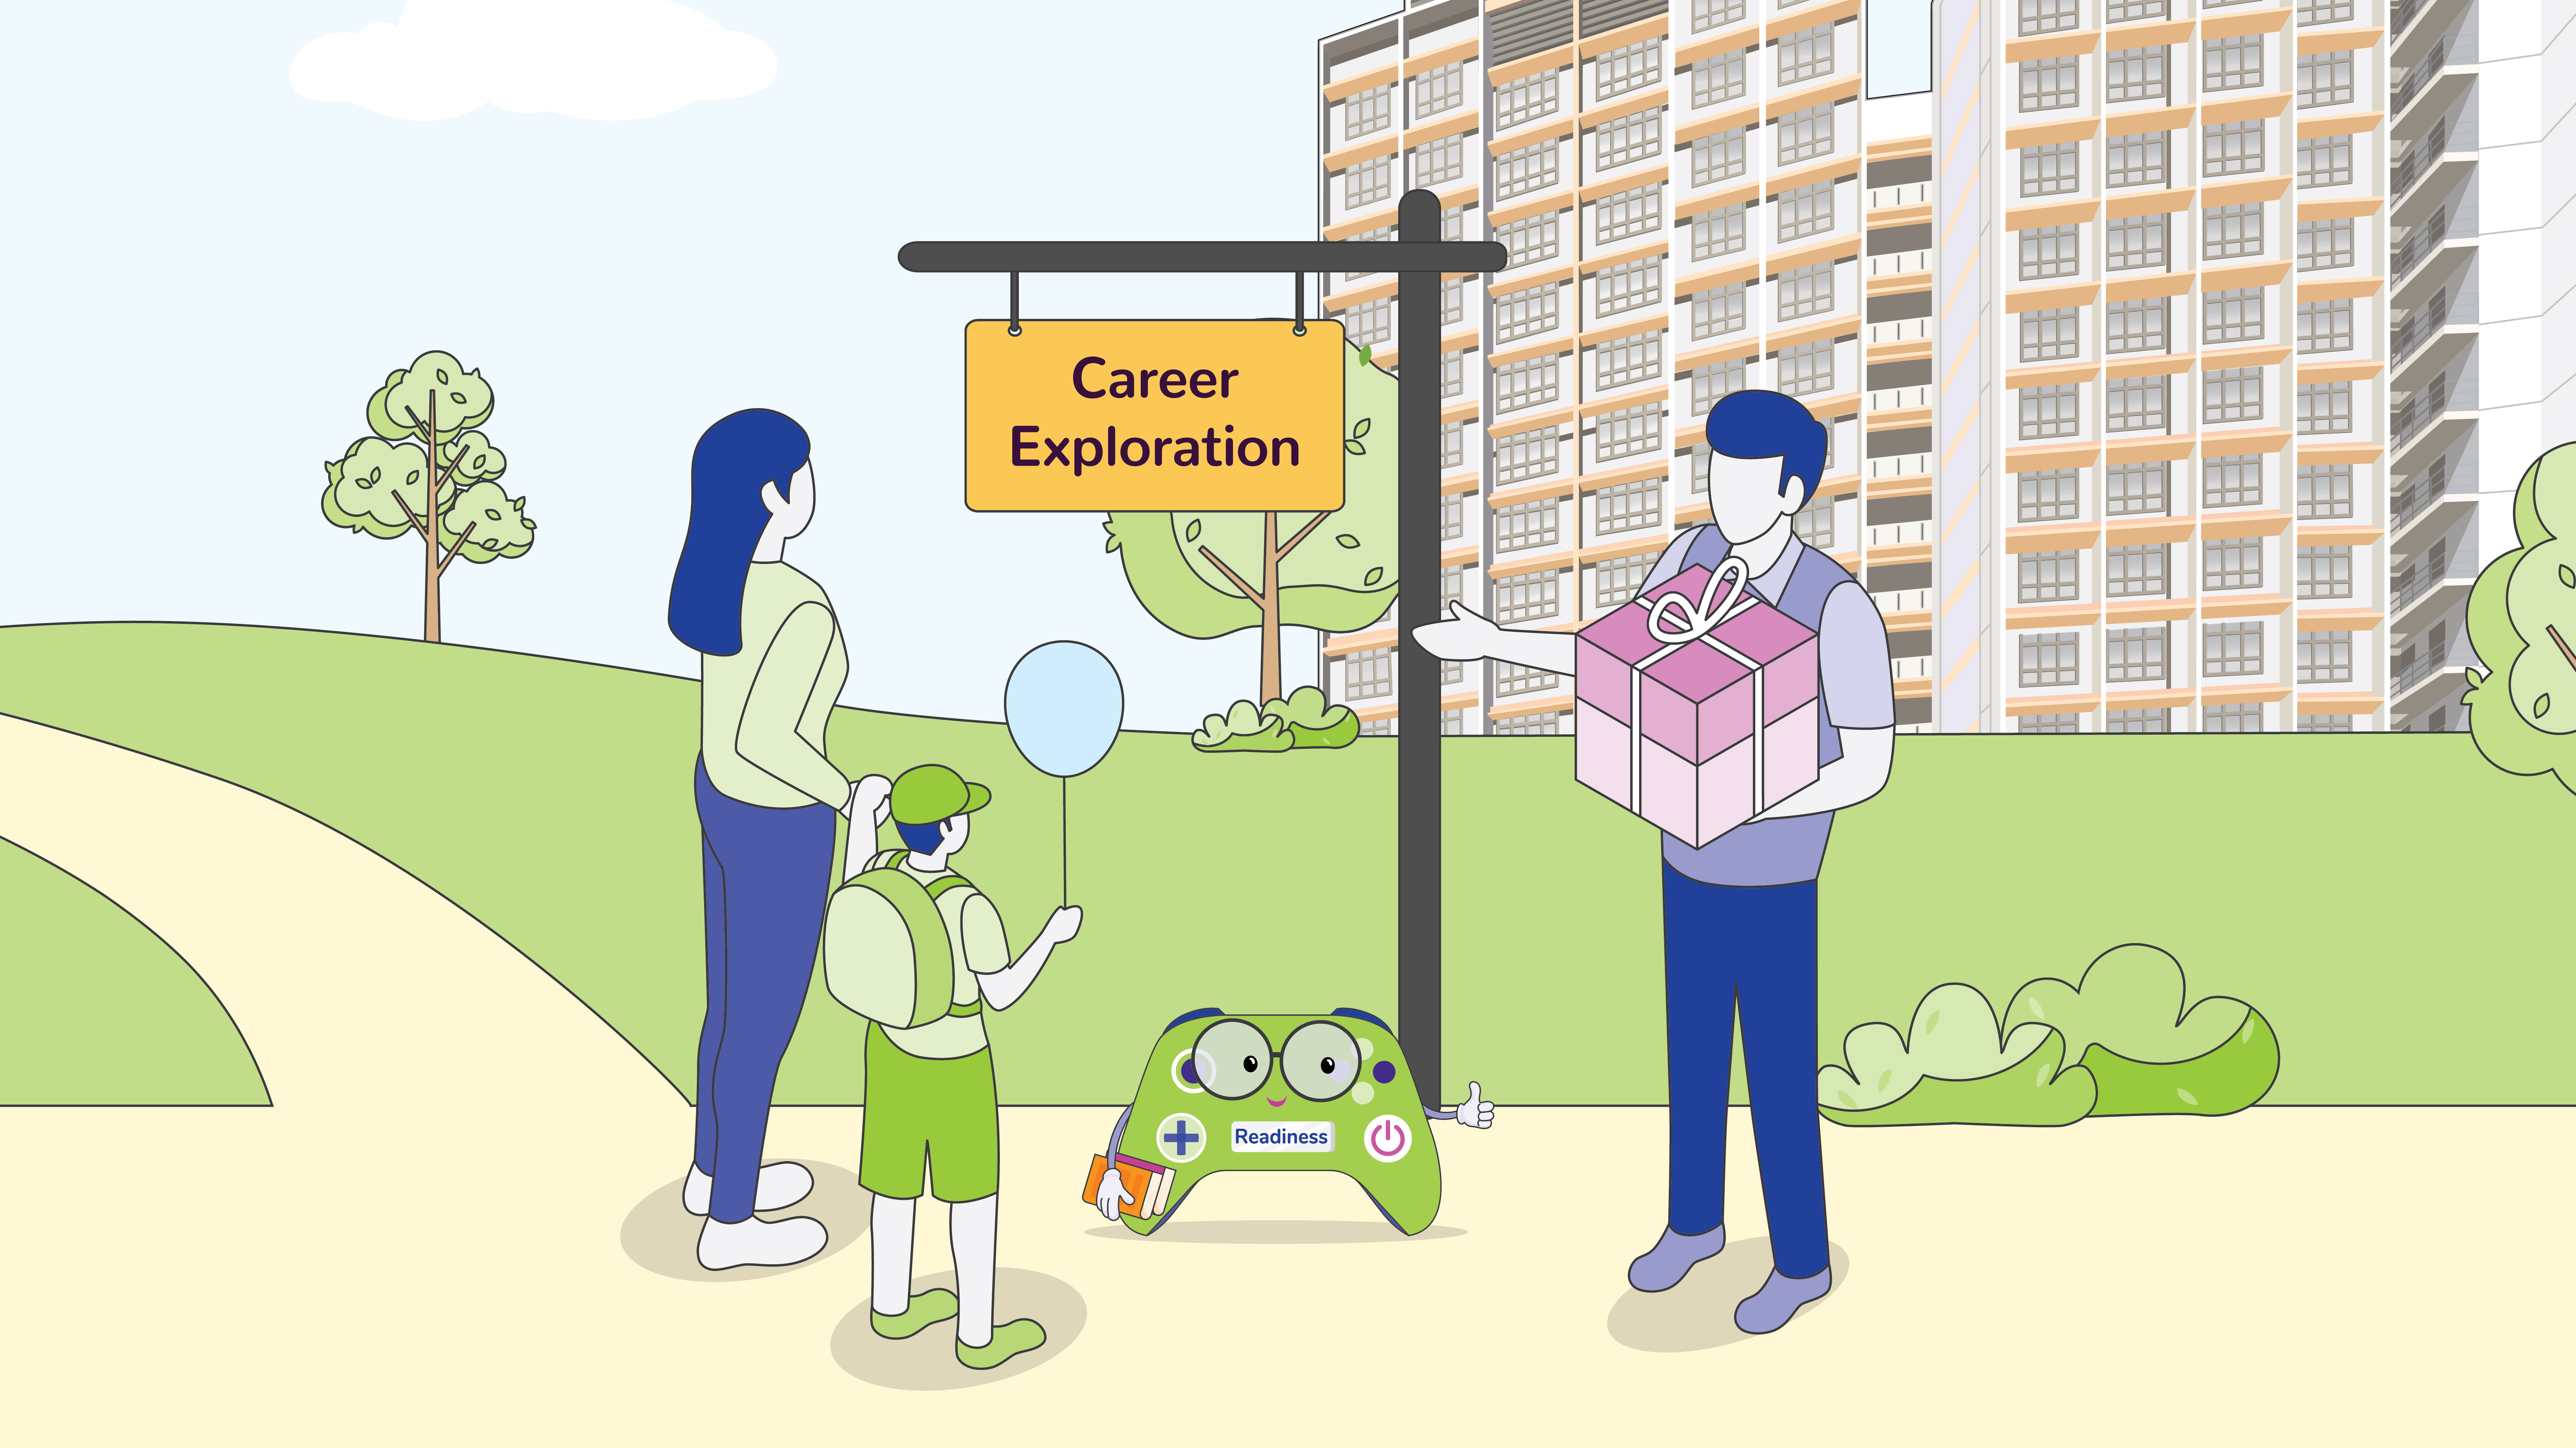 Illustration showing a event crew welcoming an individual for career exploration.